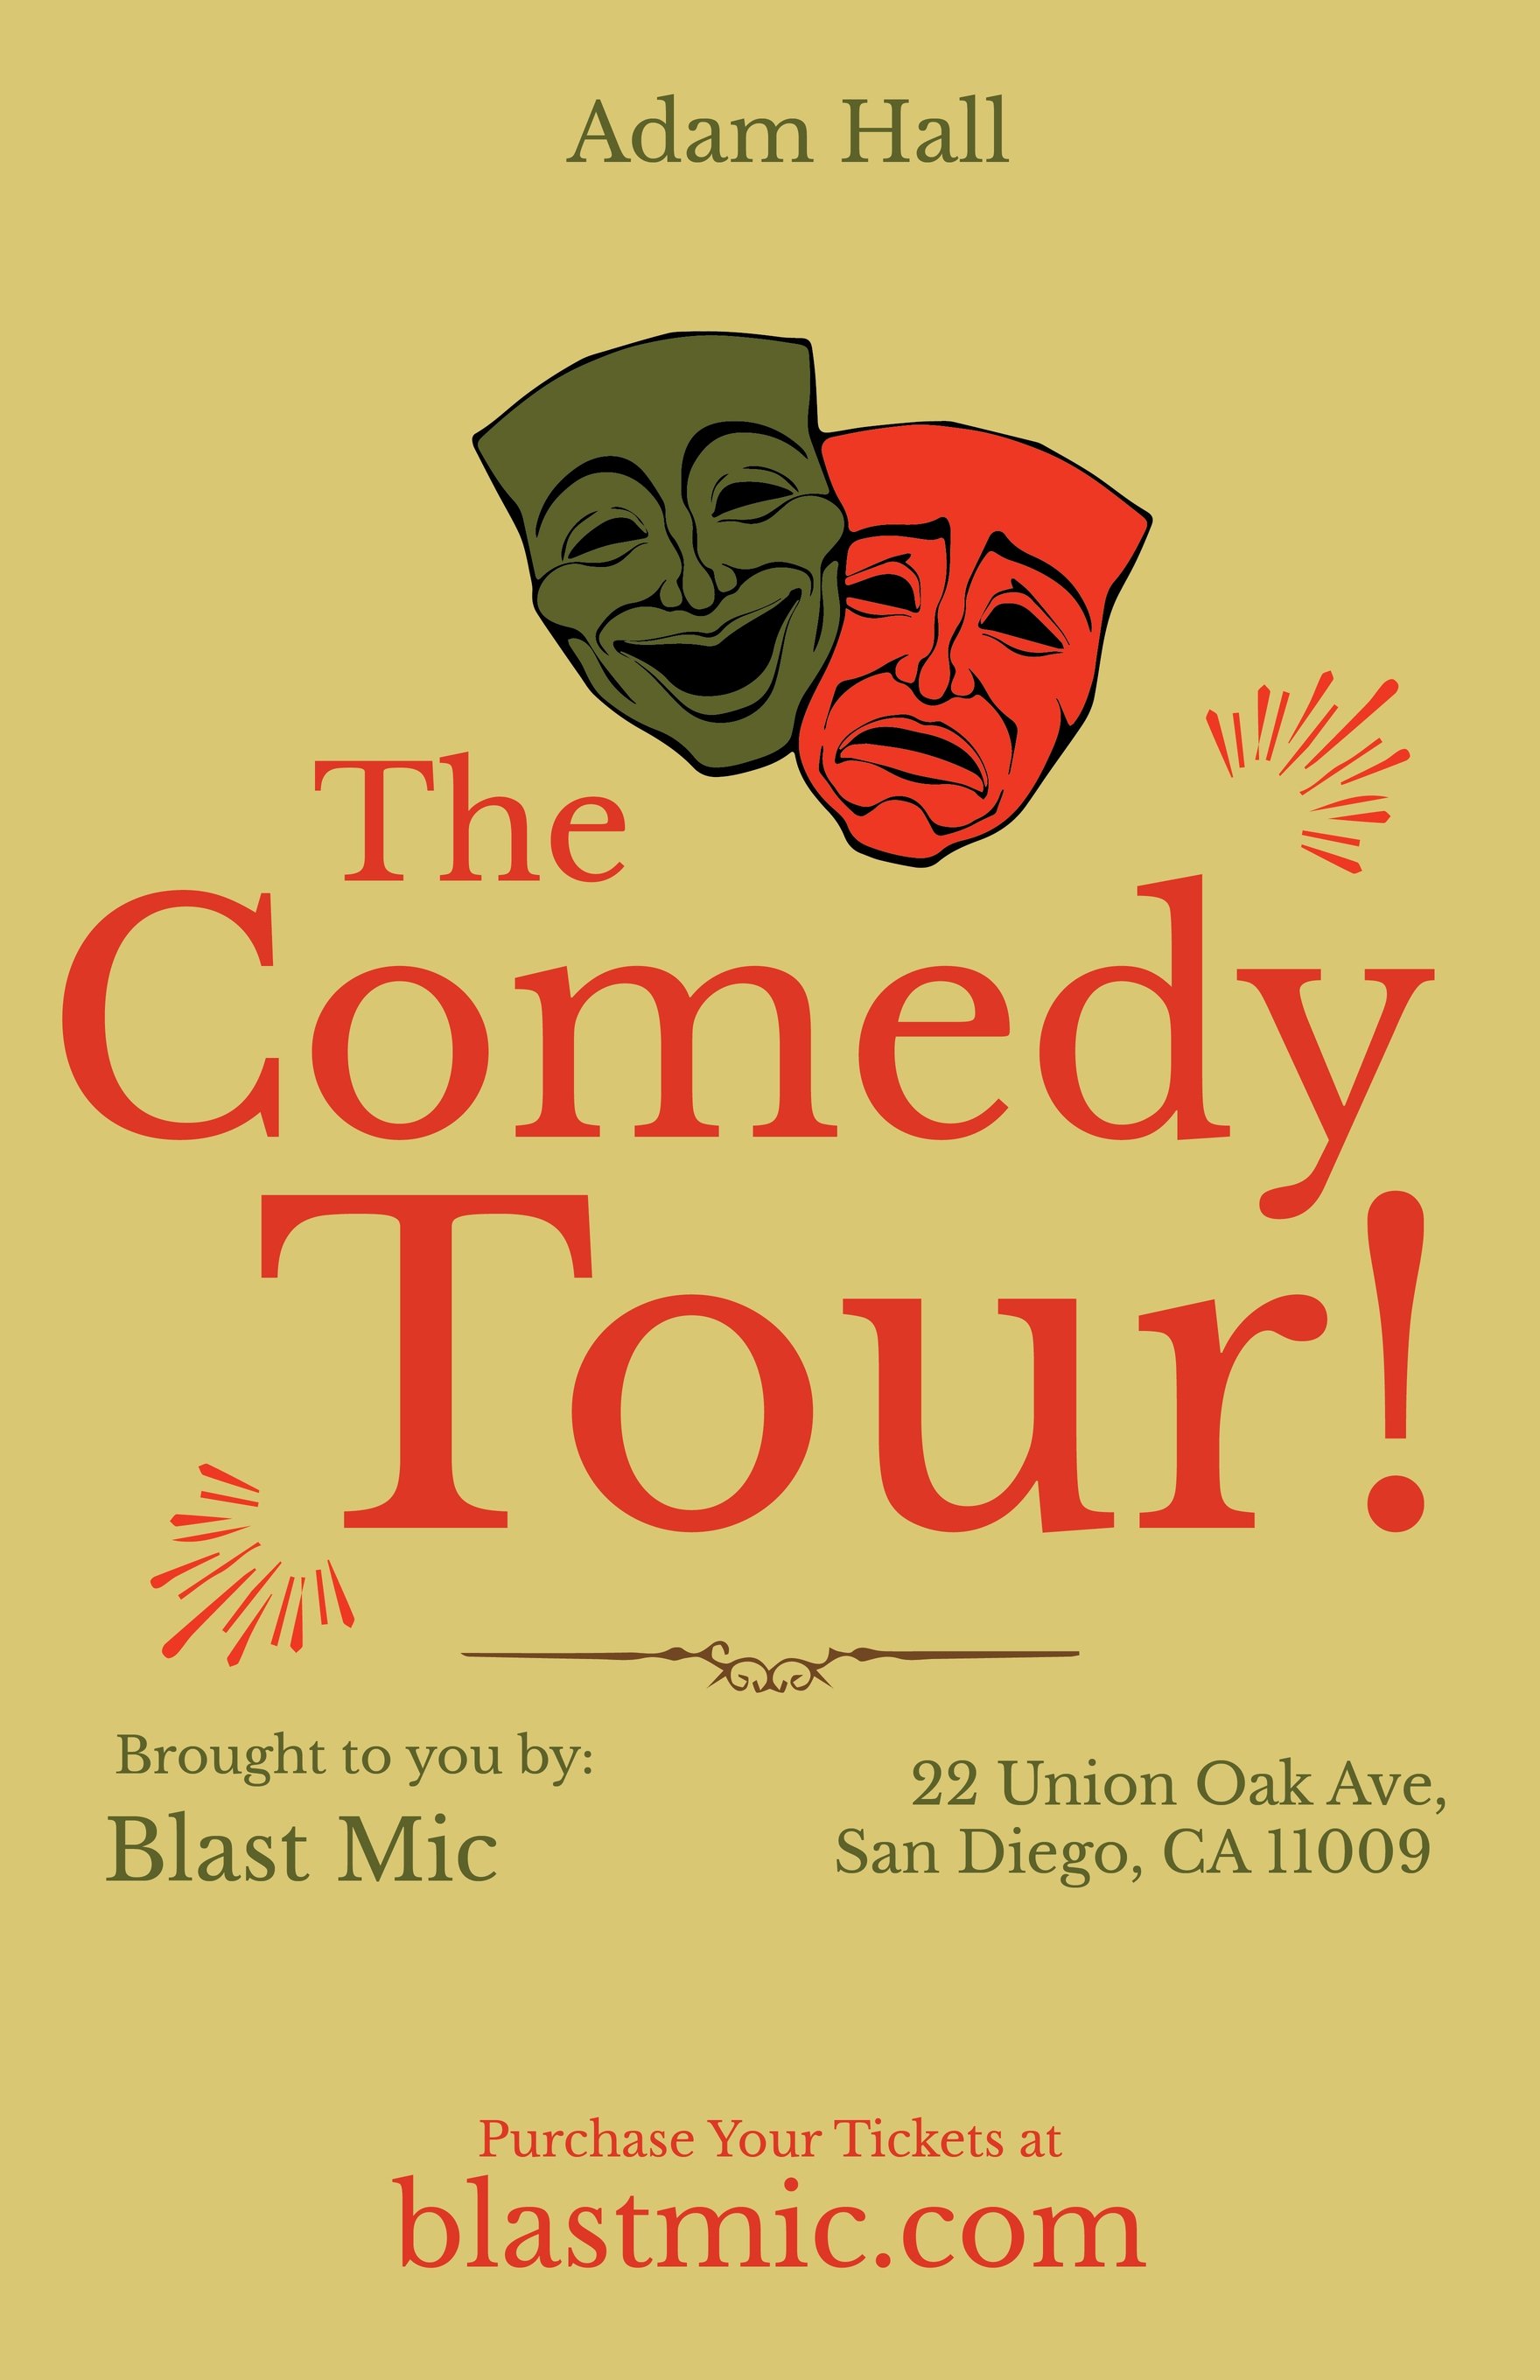 Vintage Comedy Show Poster